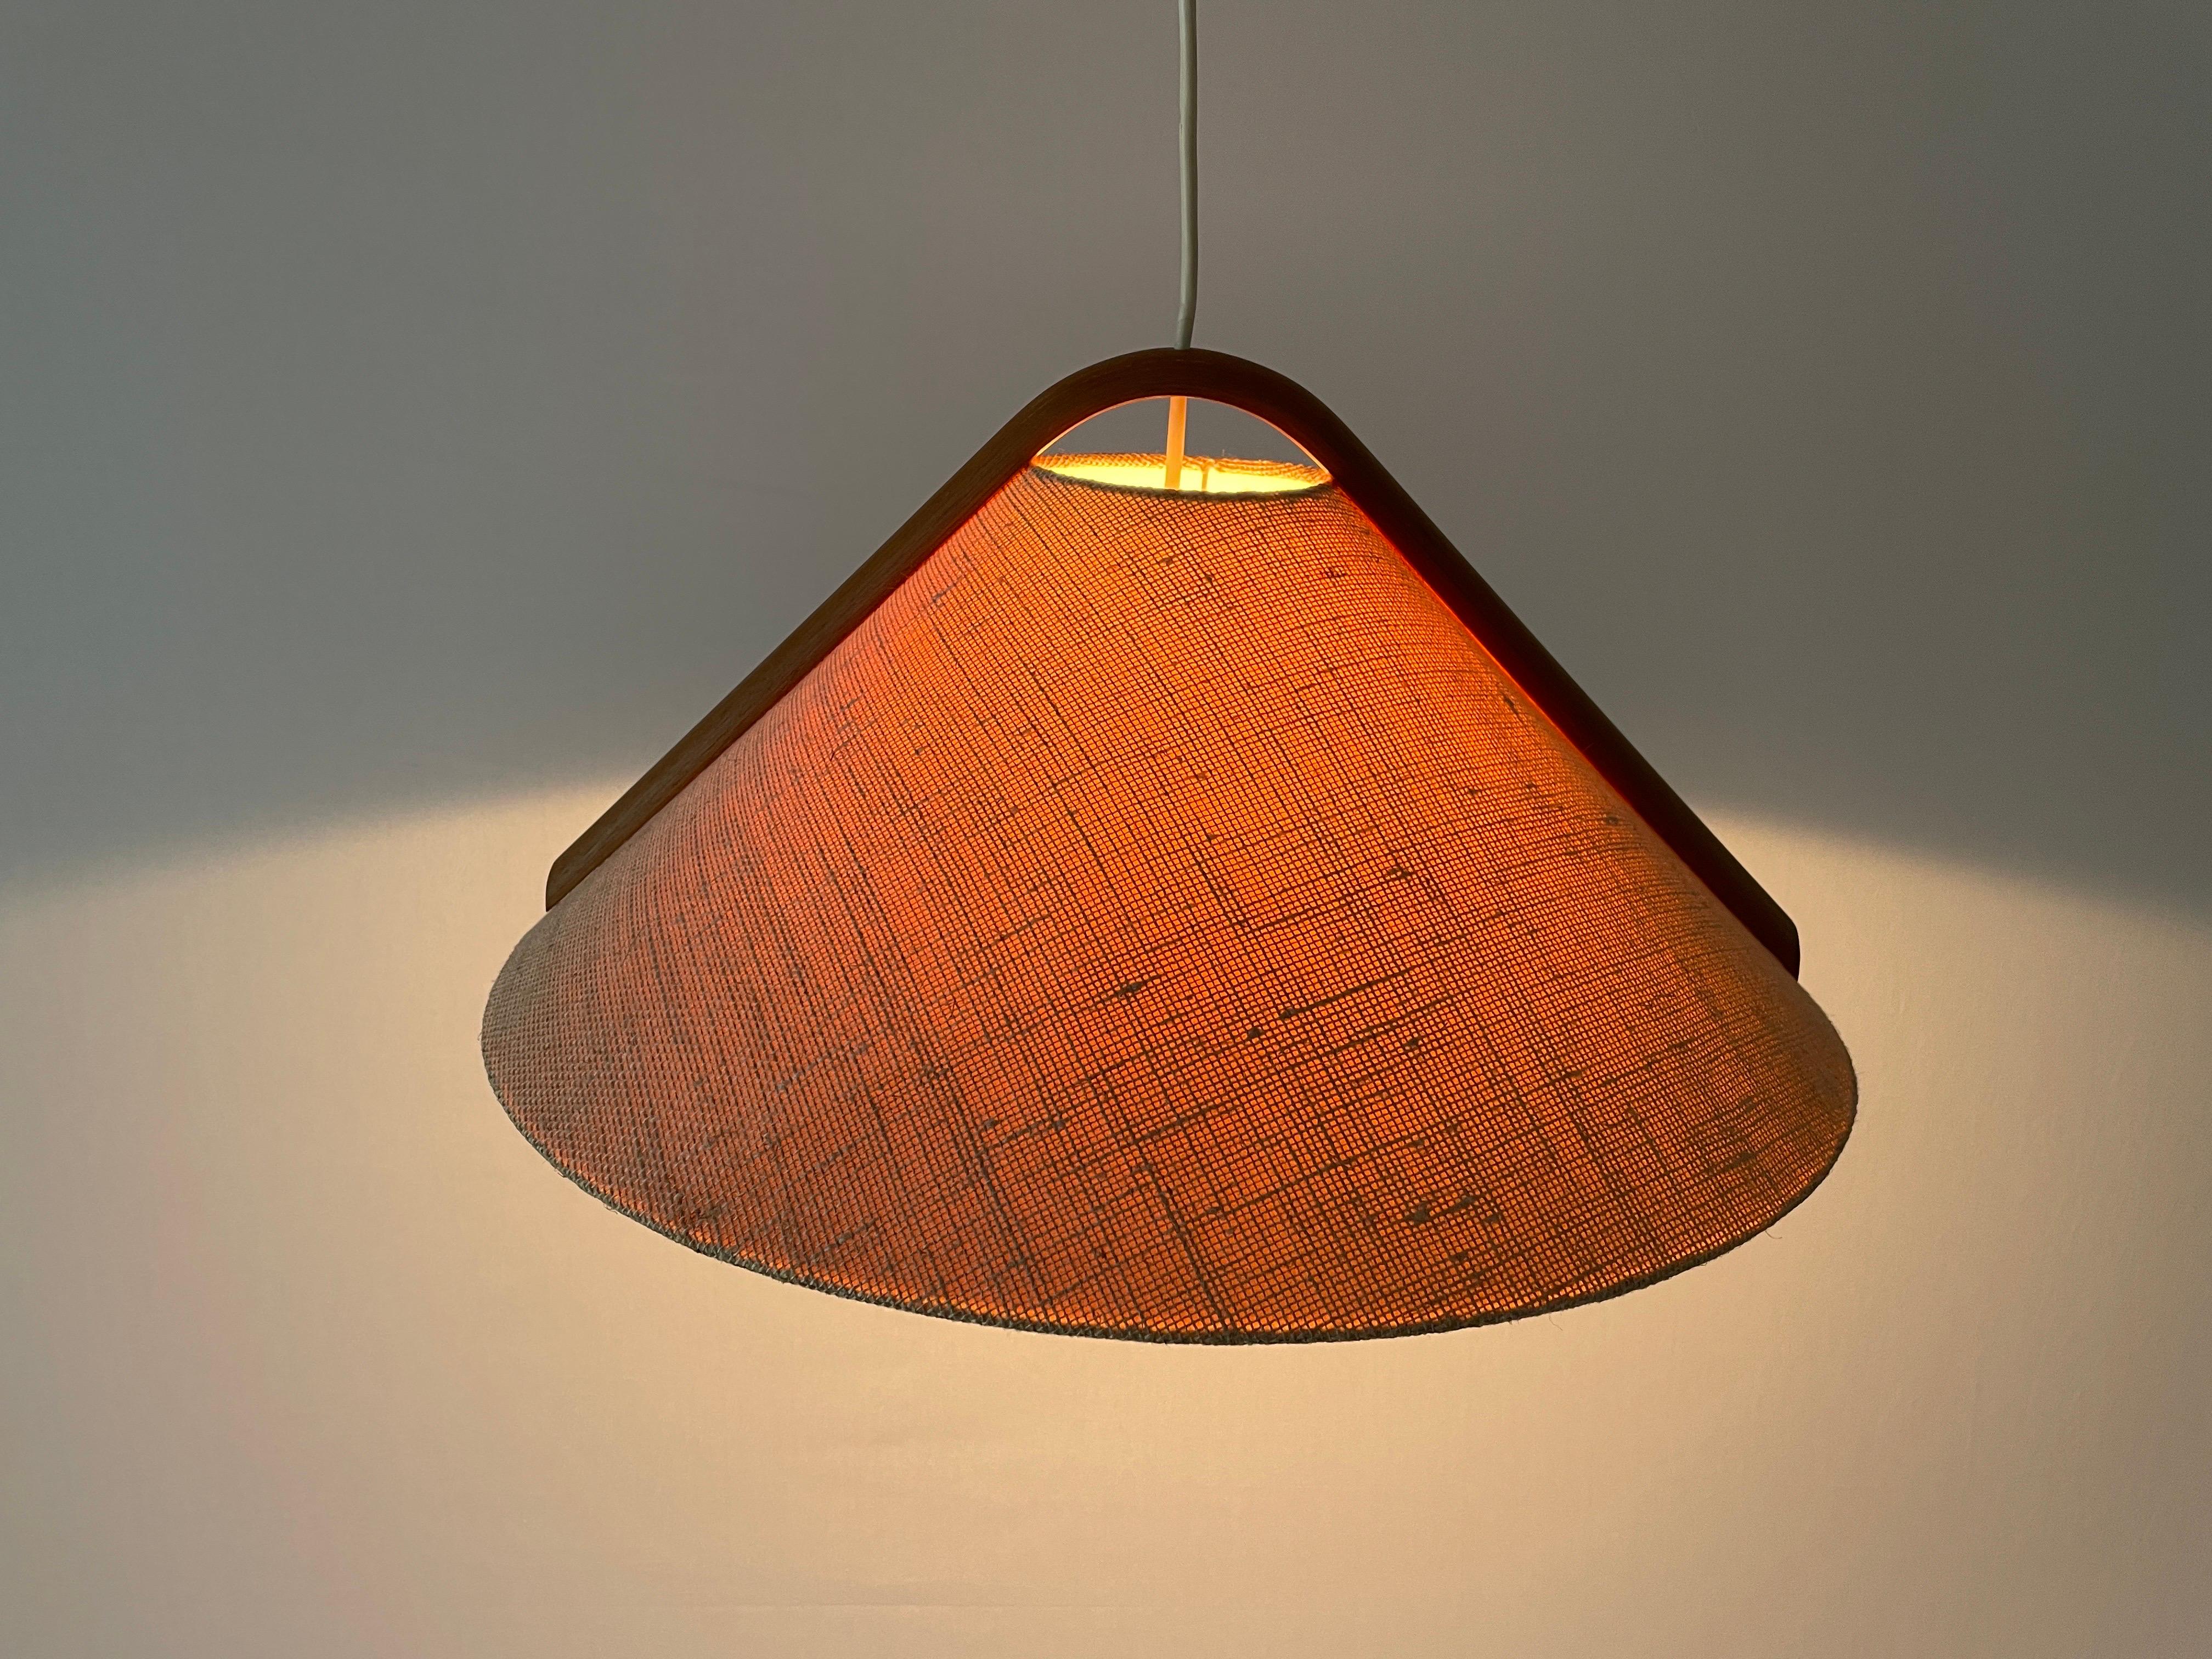 Conic Design Fabric Pendant Lamp with Teak Detail, 1960s, Germany For Sale 5